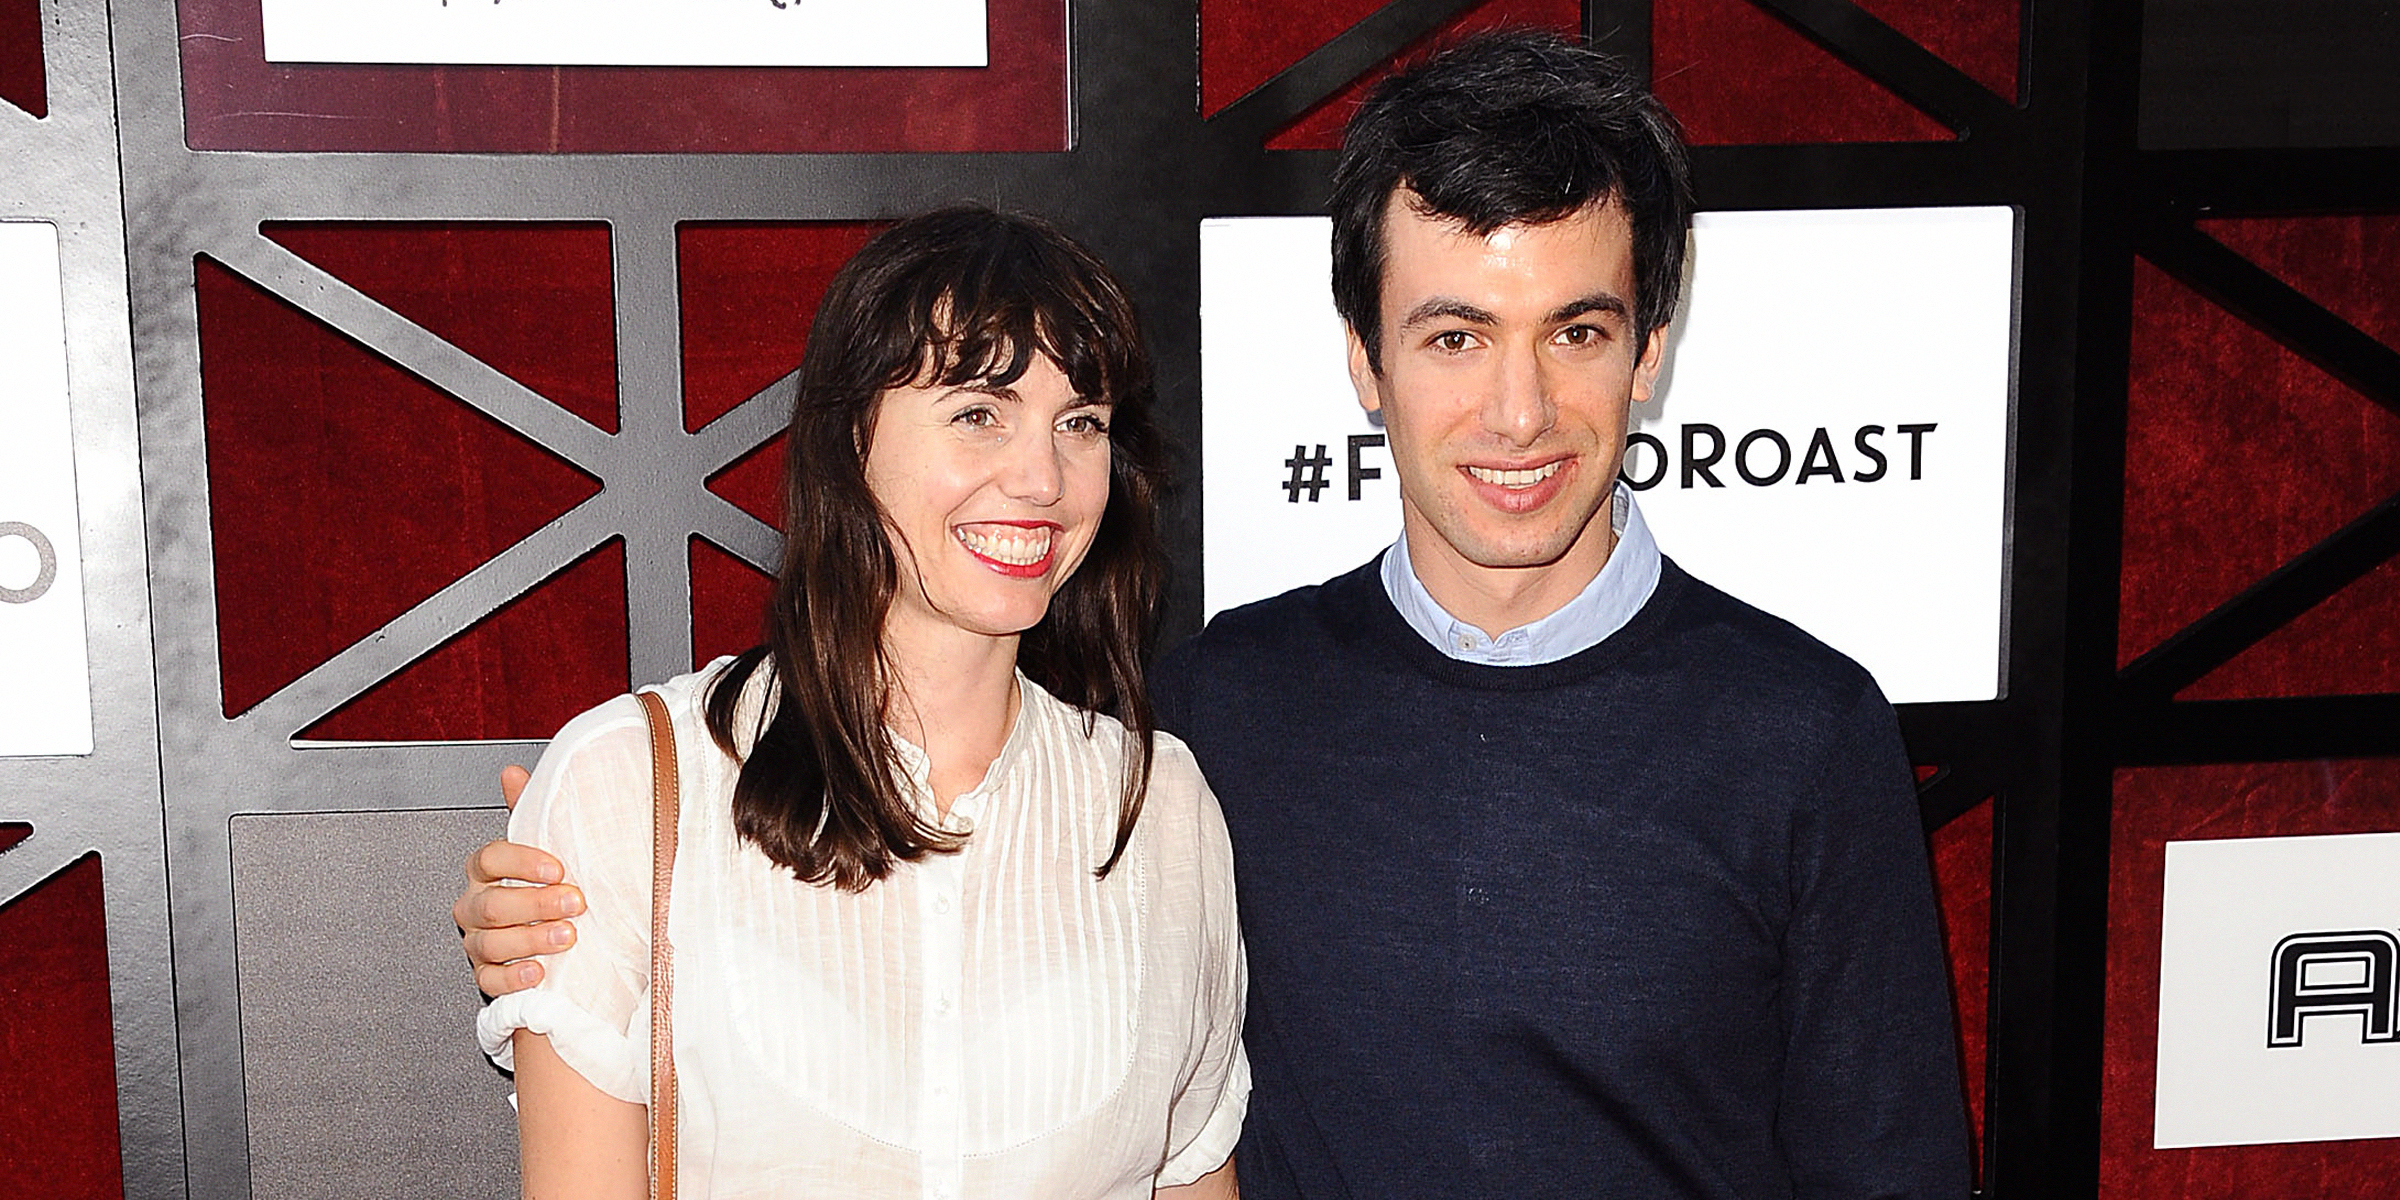 Nathan Fielder and a guest | Source: Getty Images